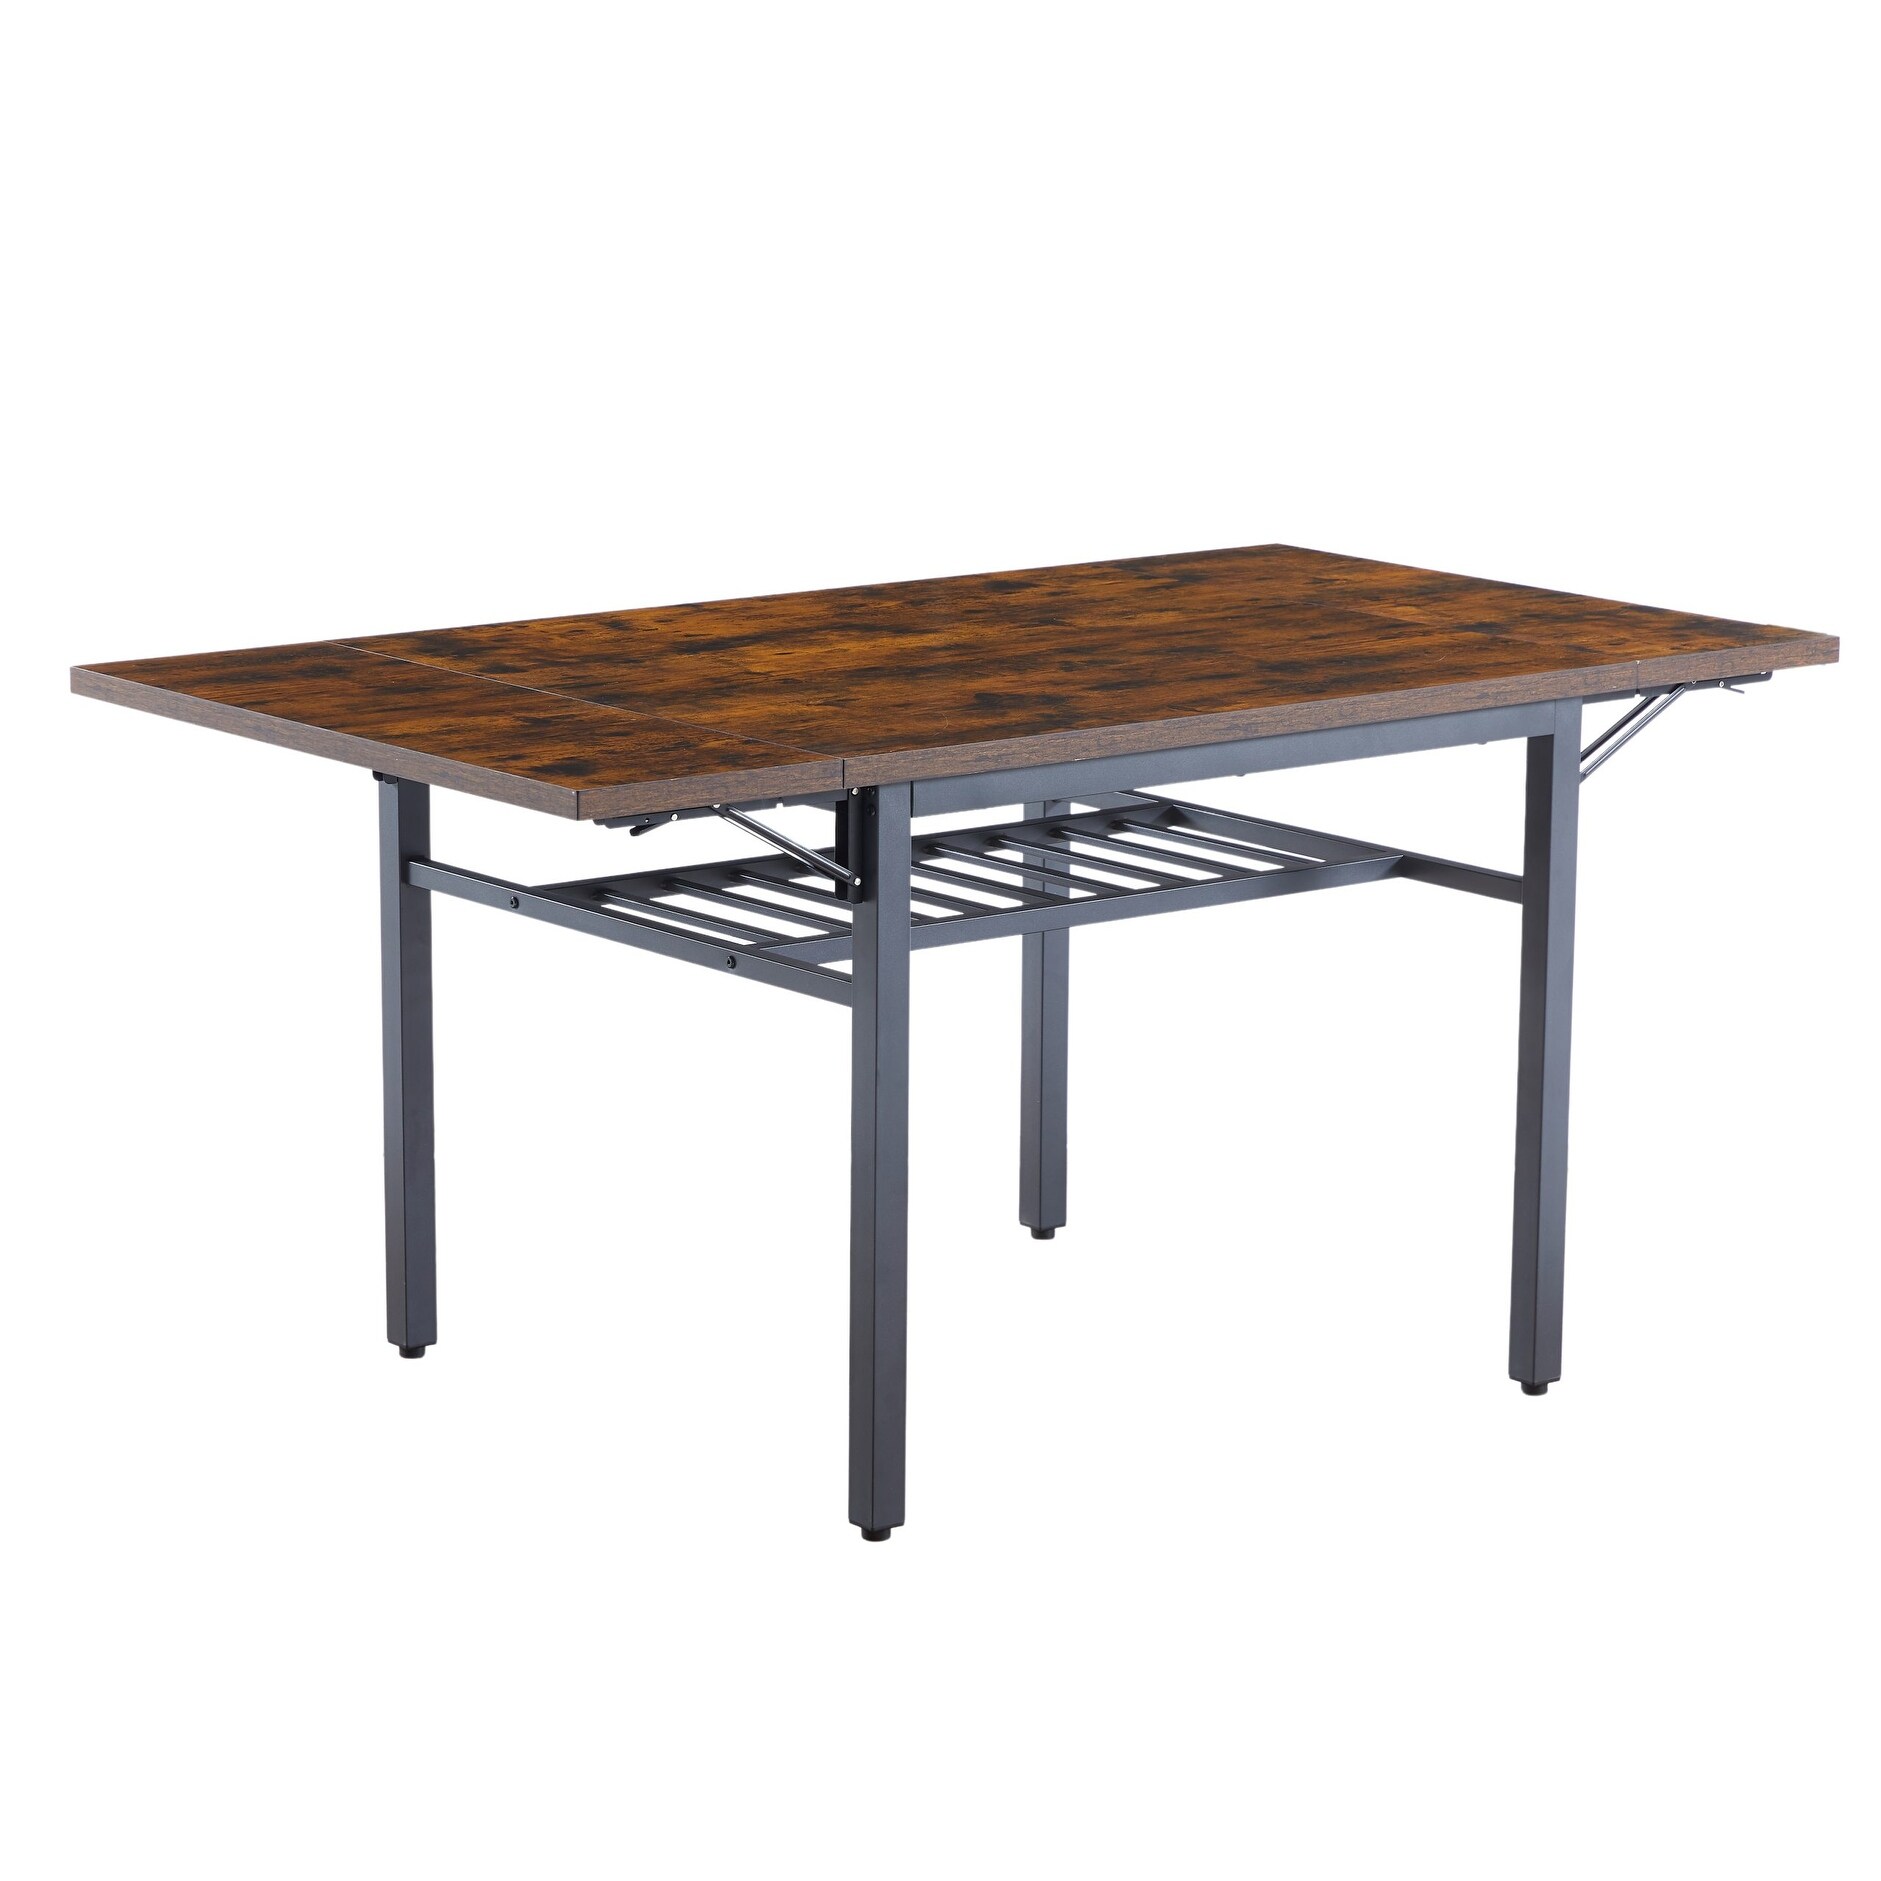 VASAGLE Folding Dining Table, Drop Leaf Extendable, for Small Spaces,  Seats